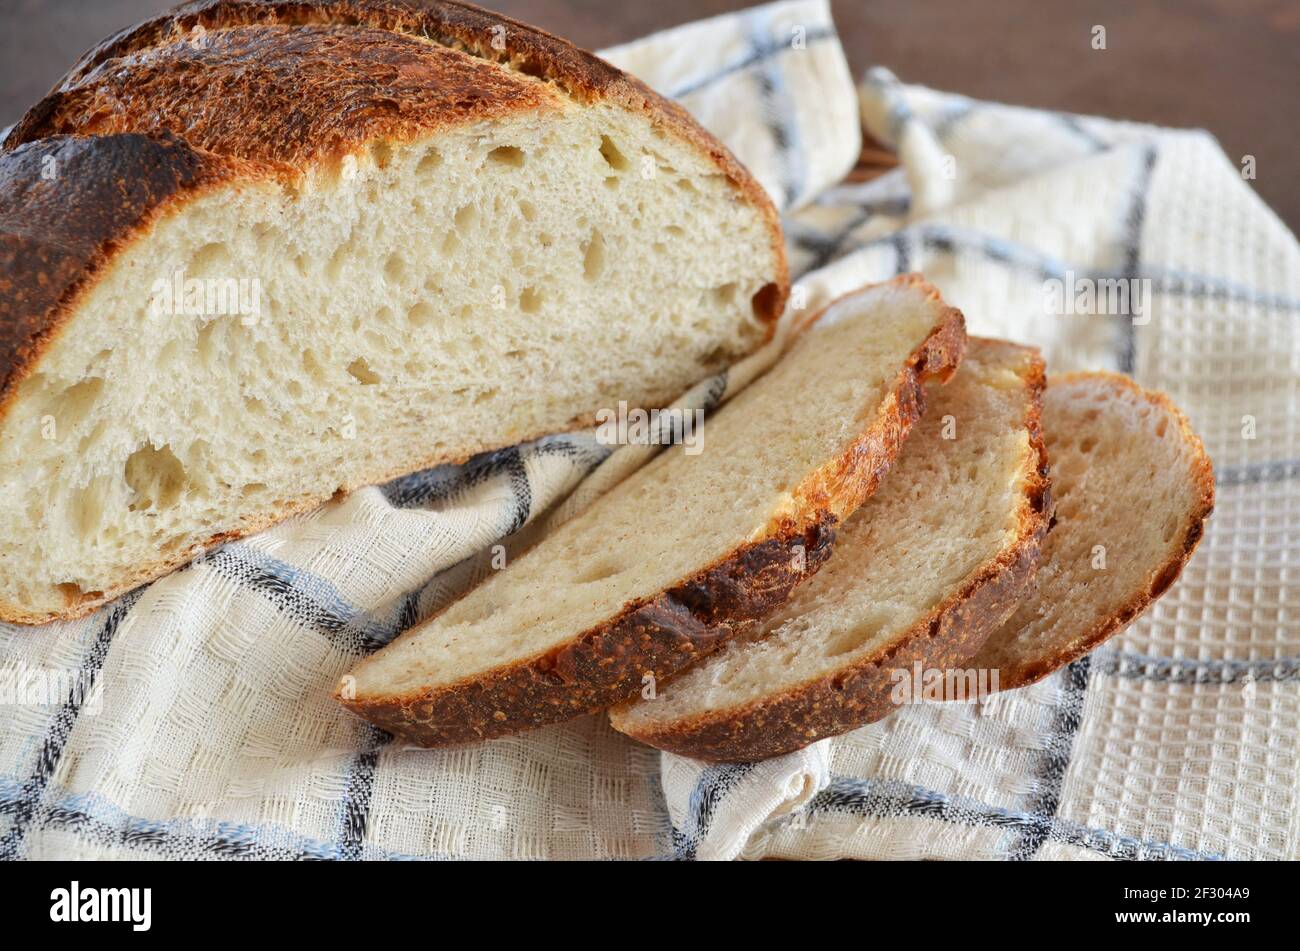 Sliced sourdough bread with a crisp crust on a kitchen towel close-up, selective focus Stock Photo